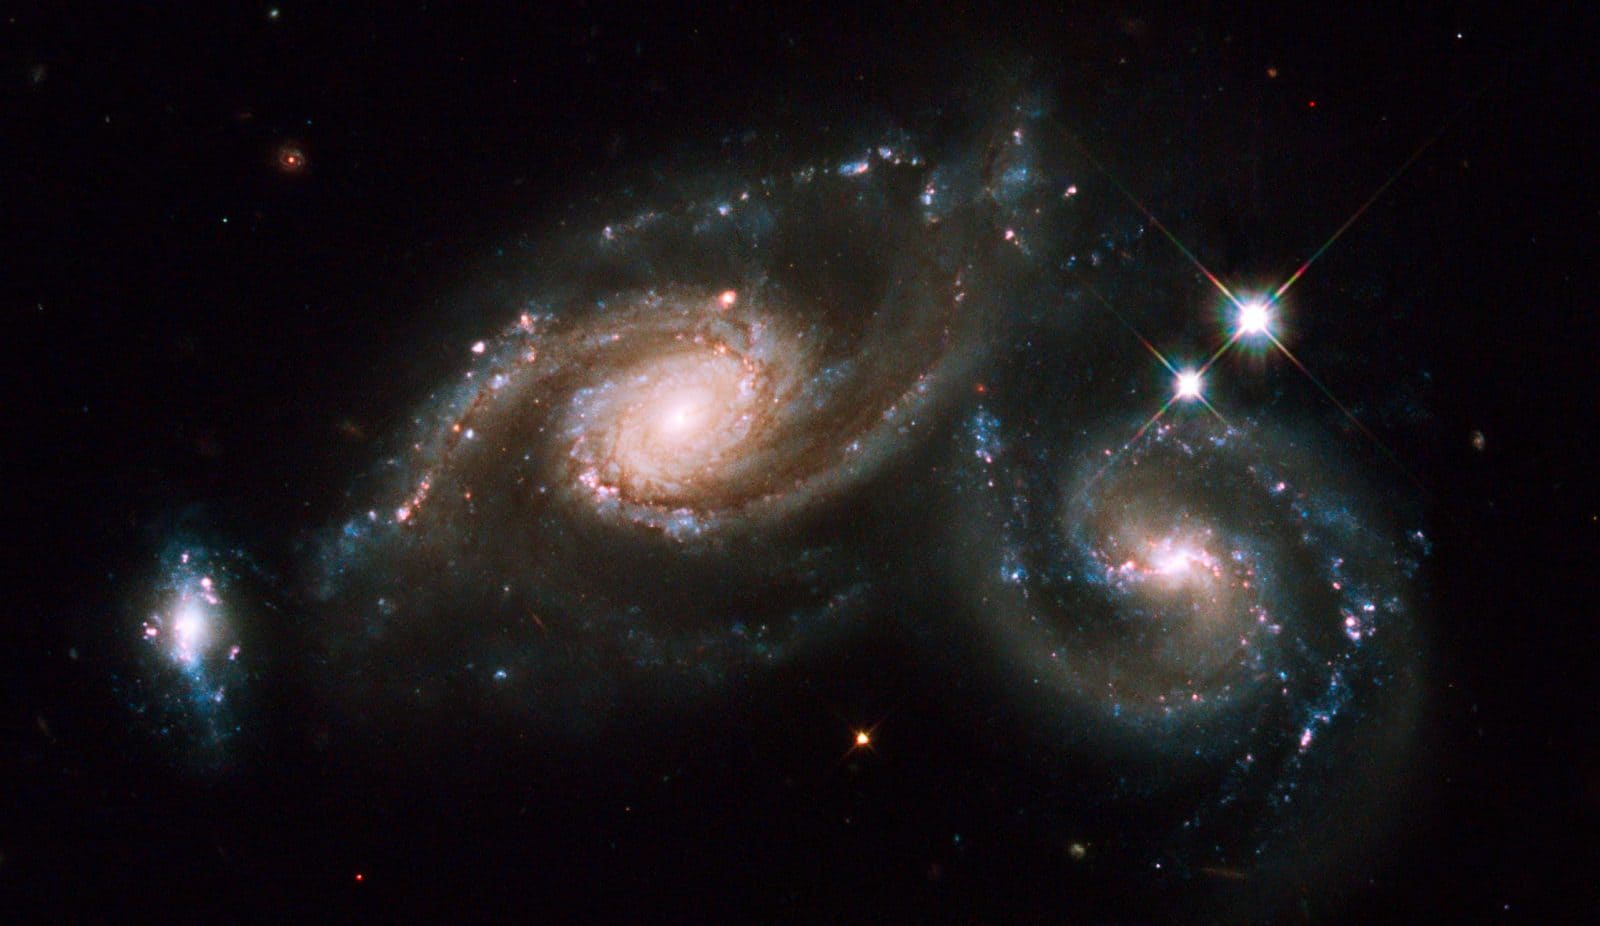 Image: On 1-2 April Hubble's Wide Field Planetary Camera 2 captured Arp 274 (also known as NGC 5679). Arp 274 is a system of three galaxies that appear to be partially overlapping in the image, although they may be at somewhat different distances.